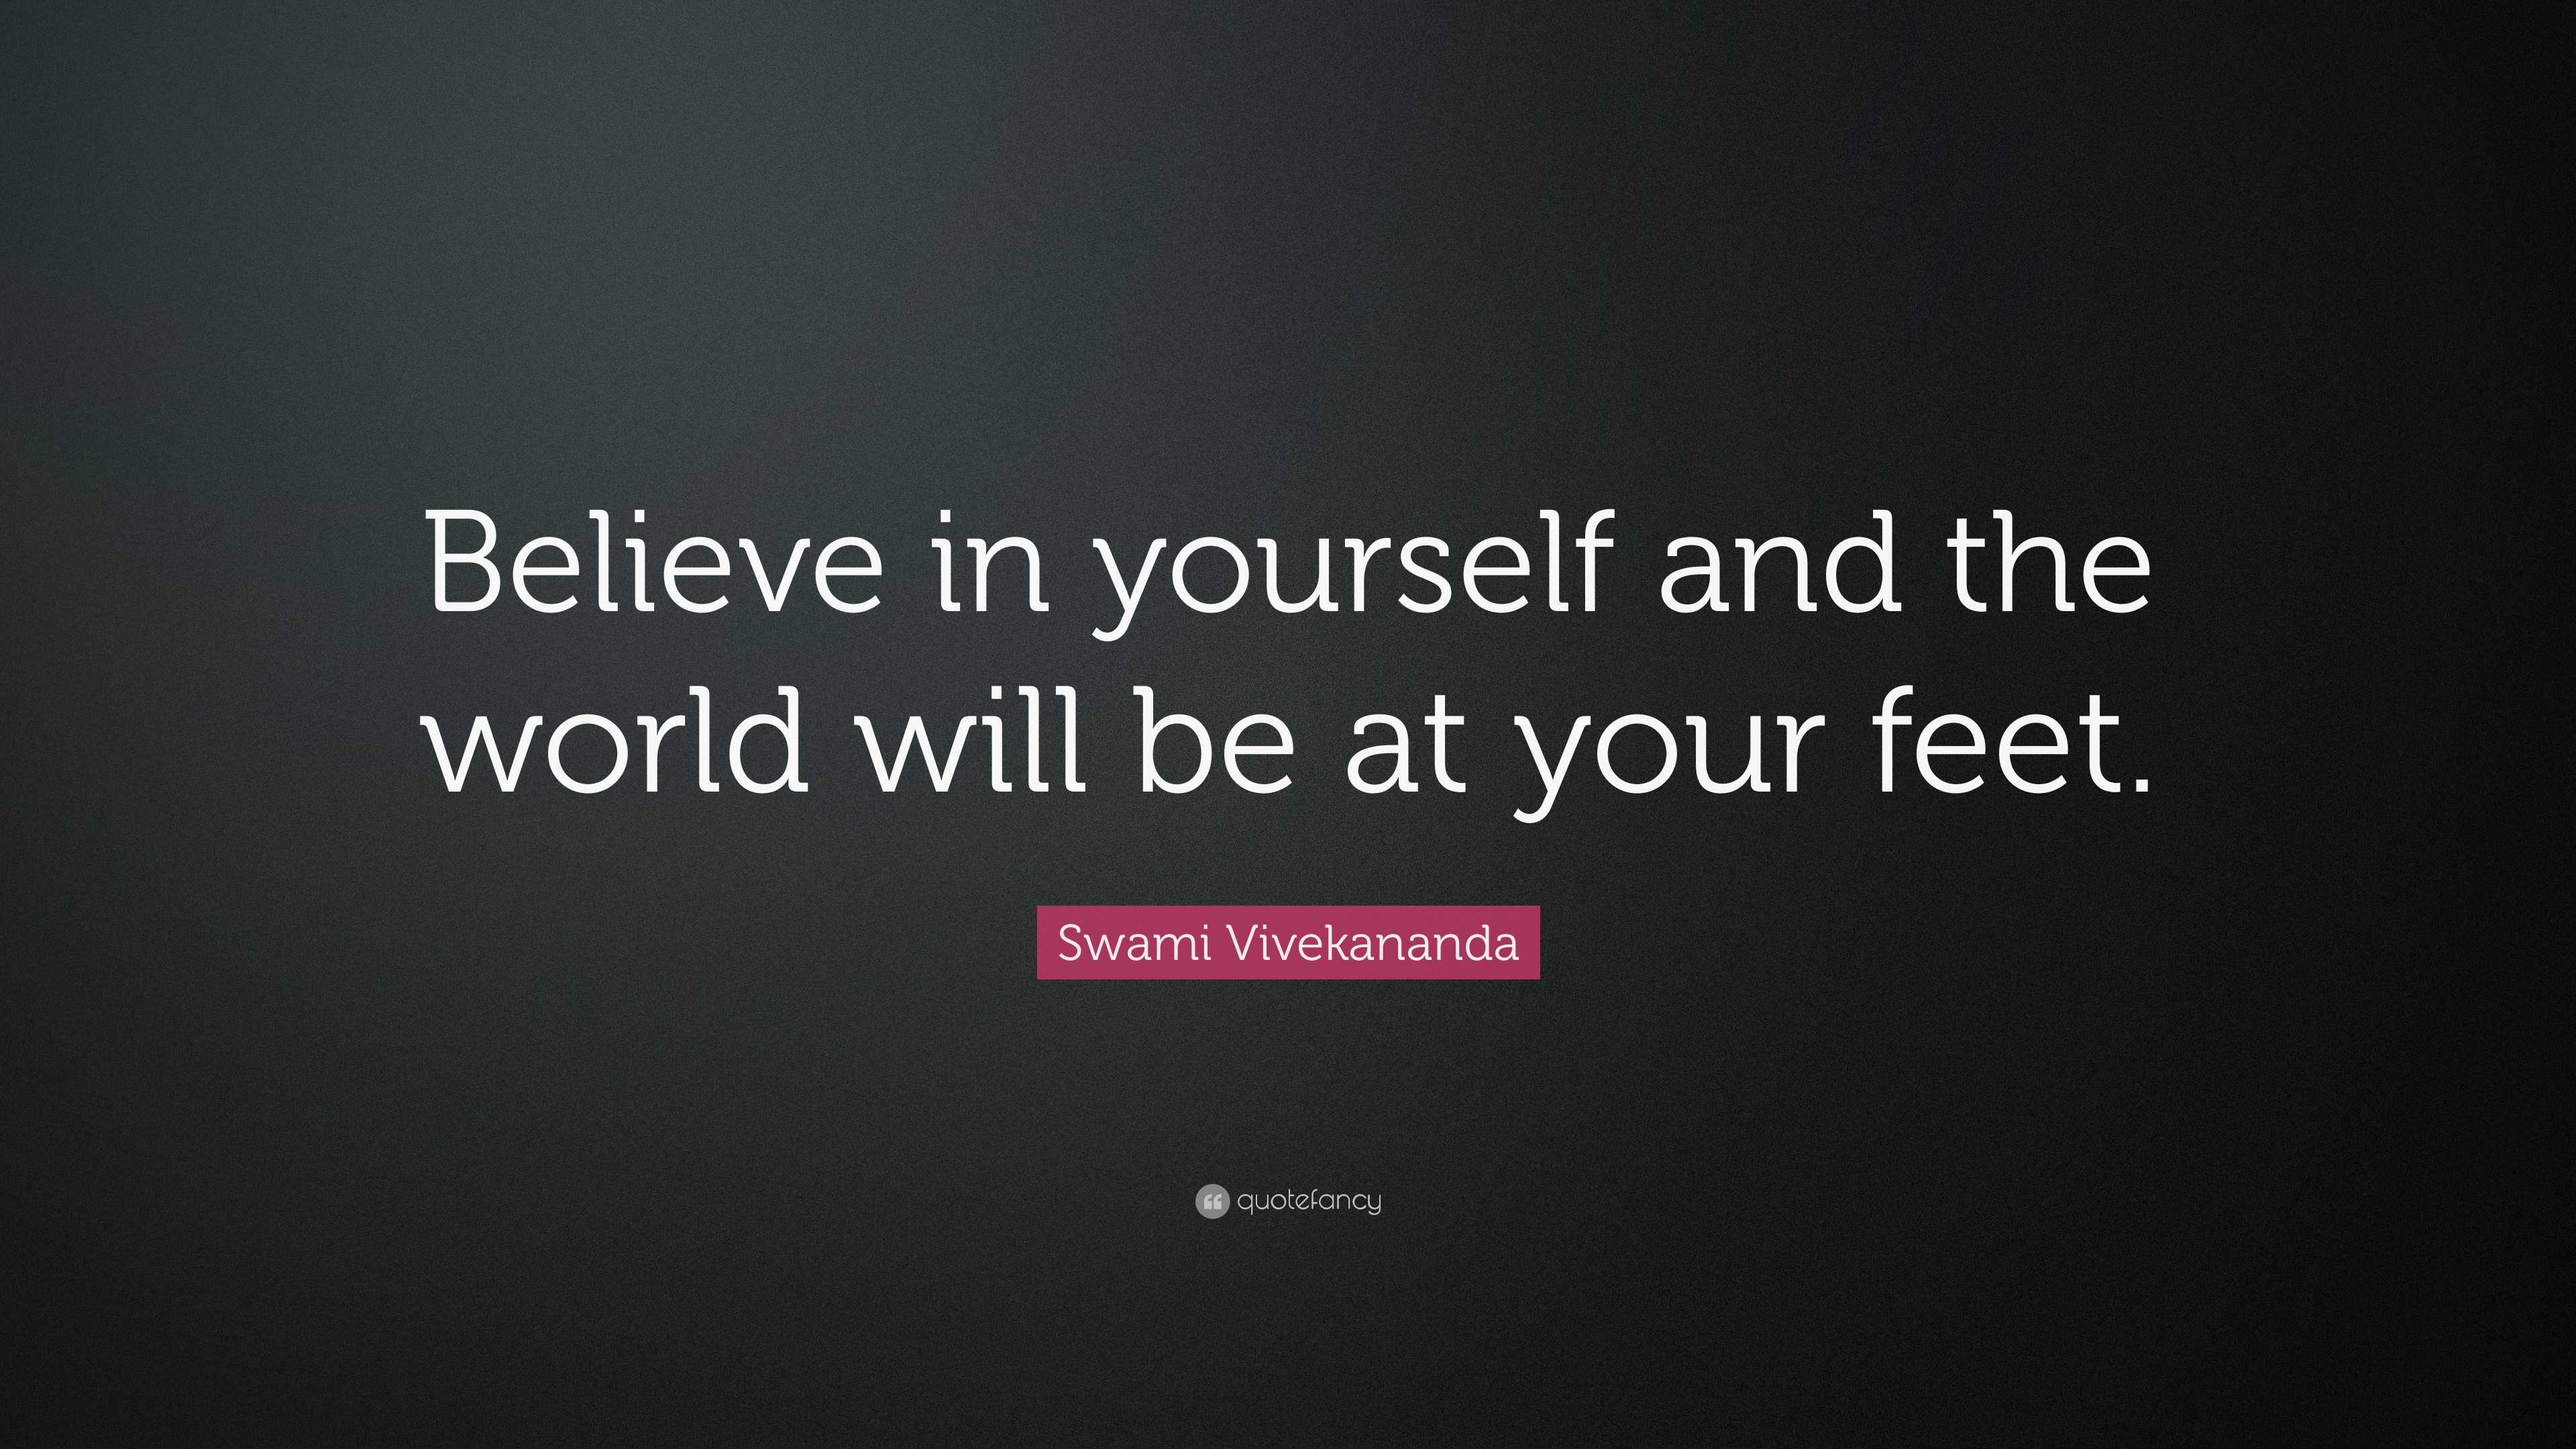 Believe in yourself and the world will be at your feet. Swami Vivekananda